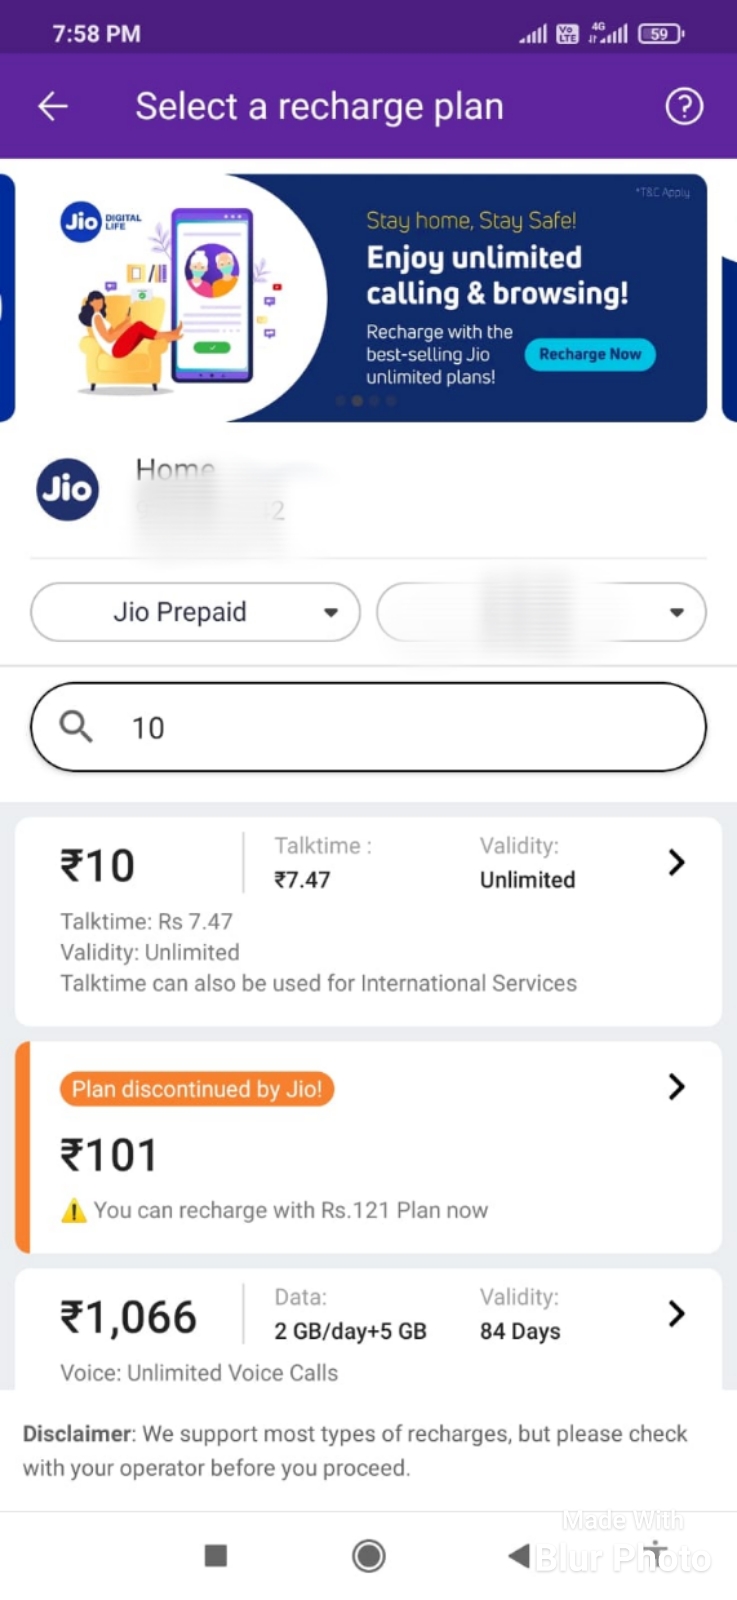 PhonePe platform to recharge mobile number